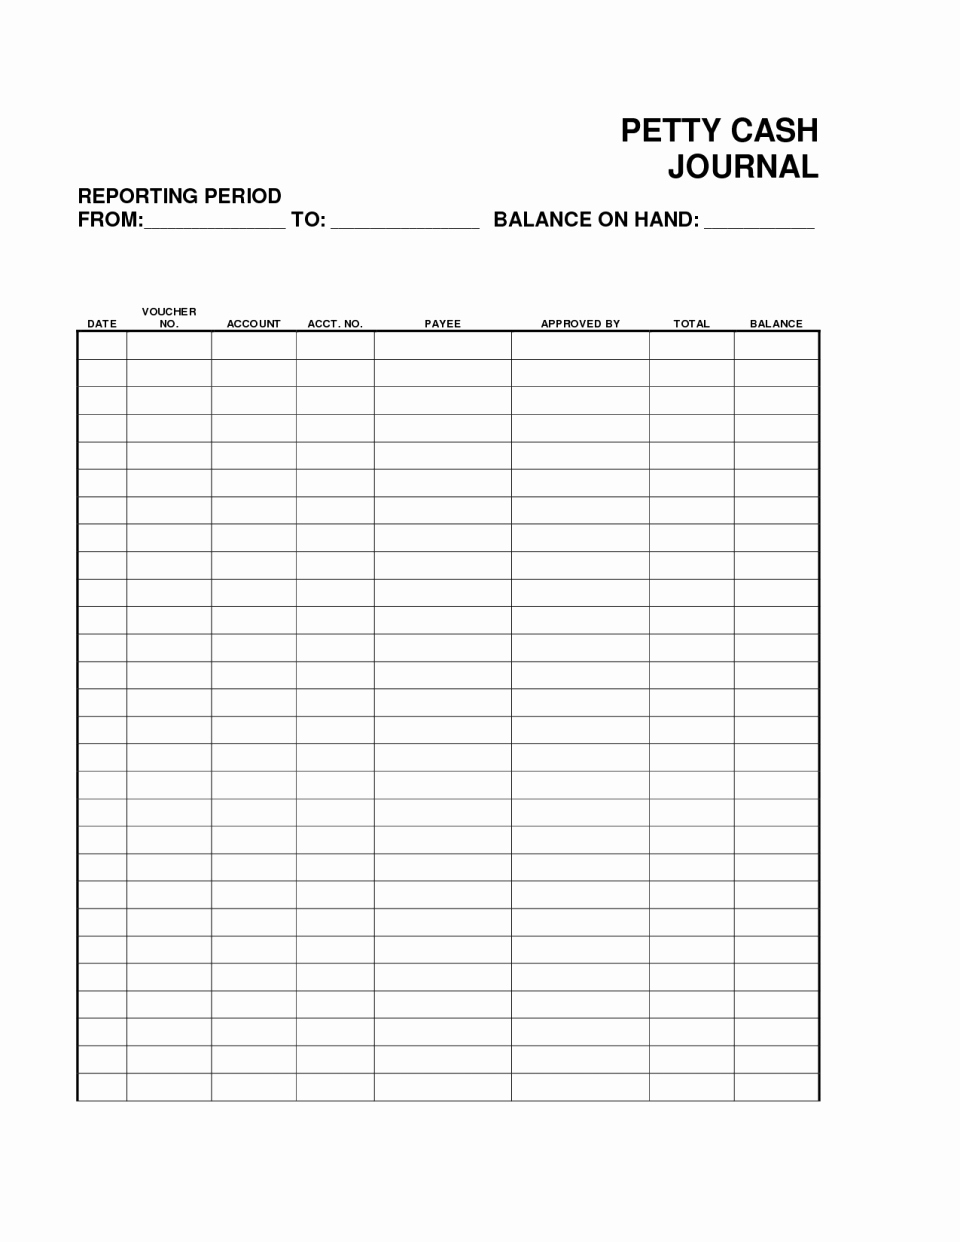 Daily Cash Sheet Template Excel Luxury Cash Sheet Template Free Personal Flow Excel forecast Up